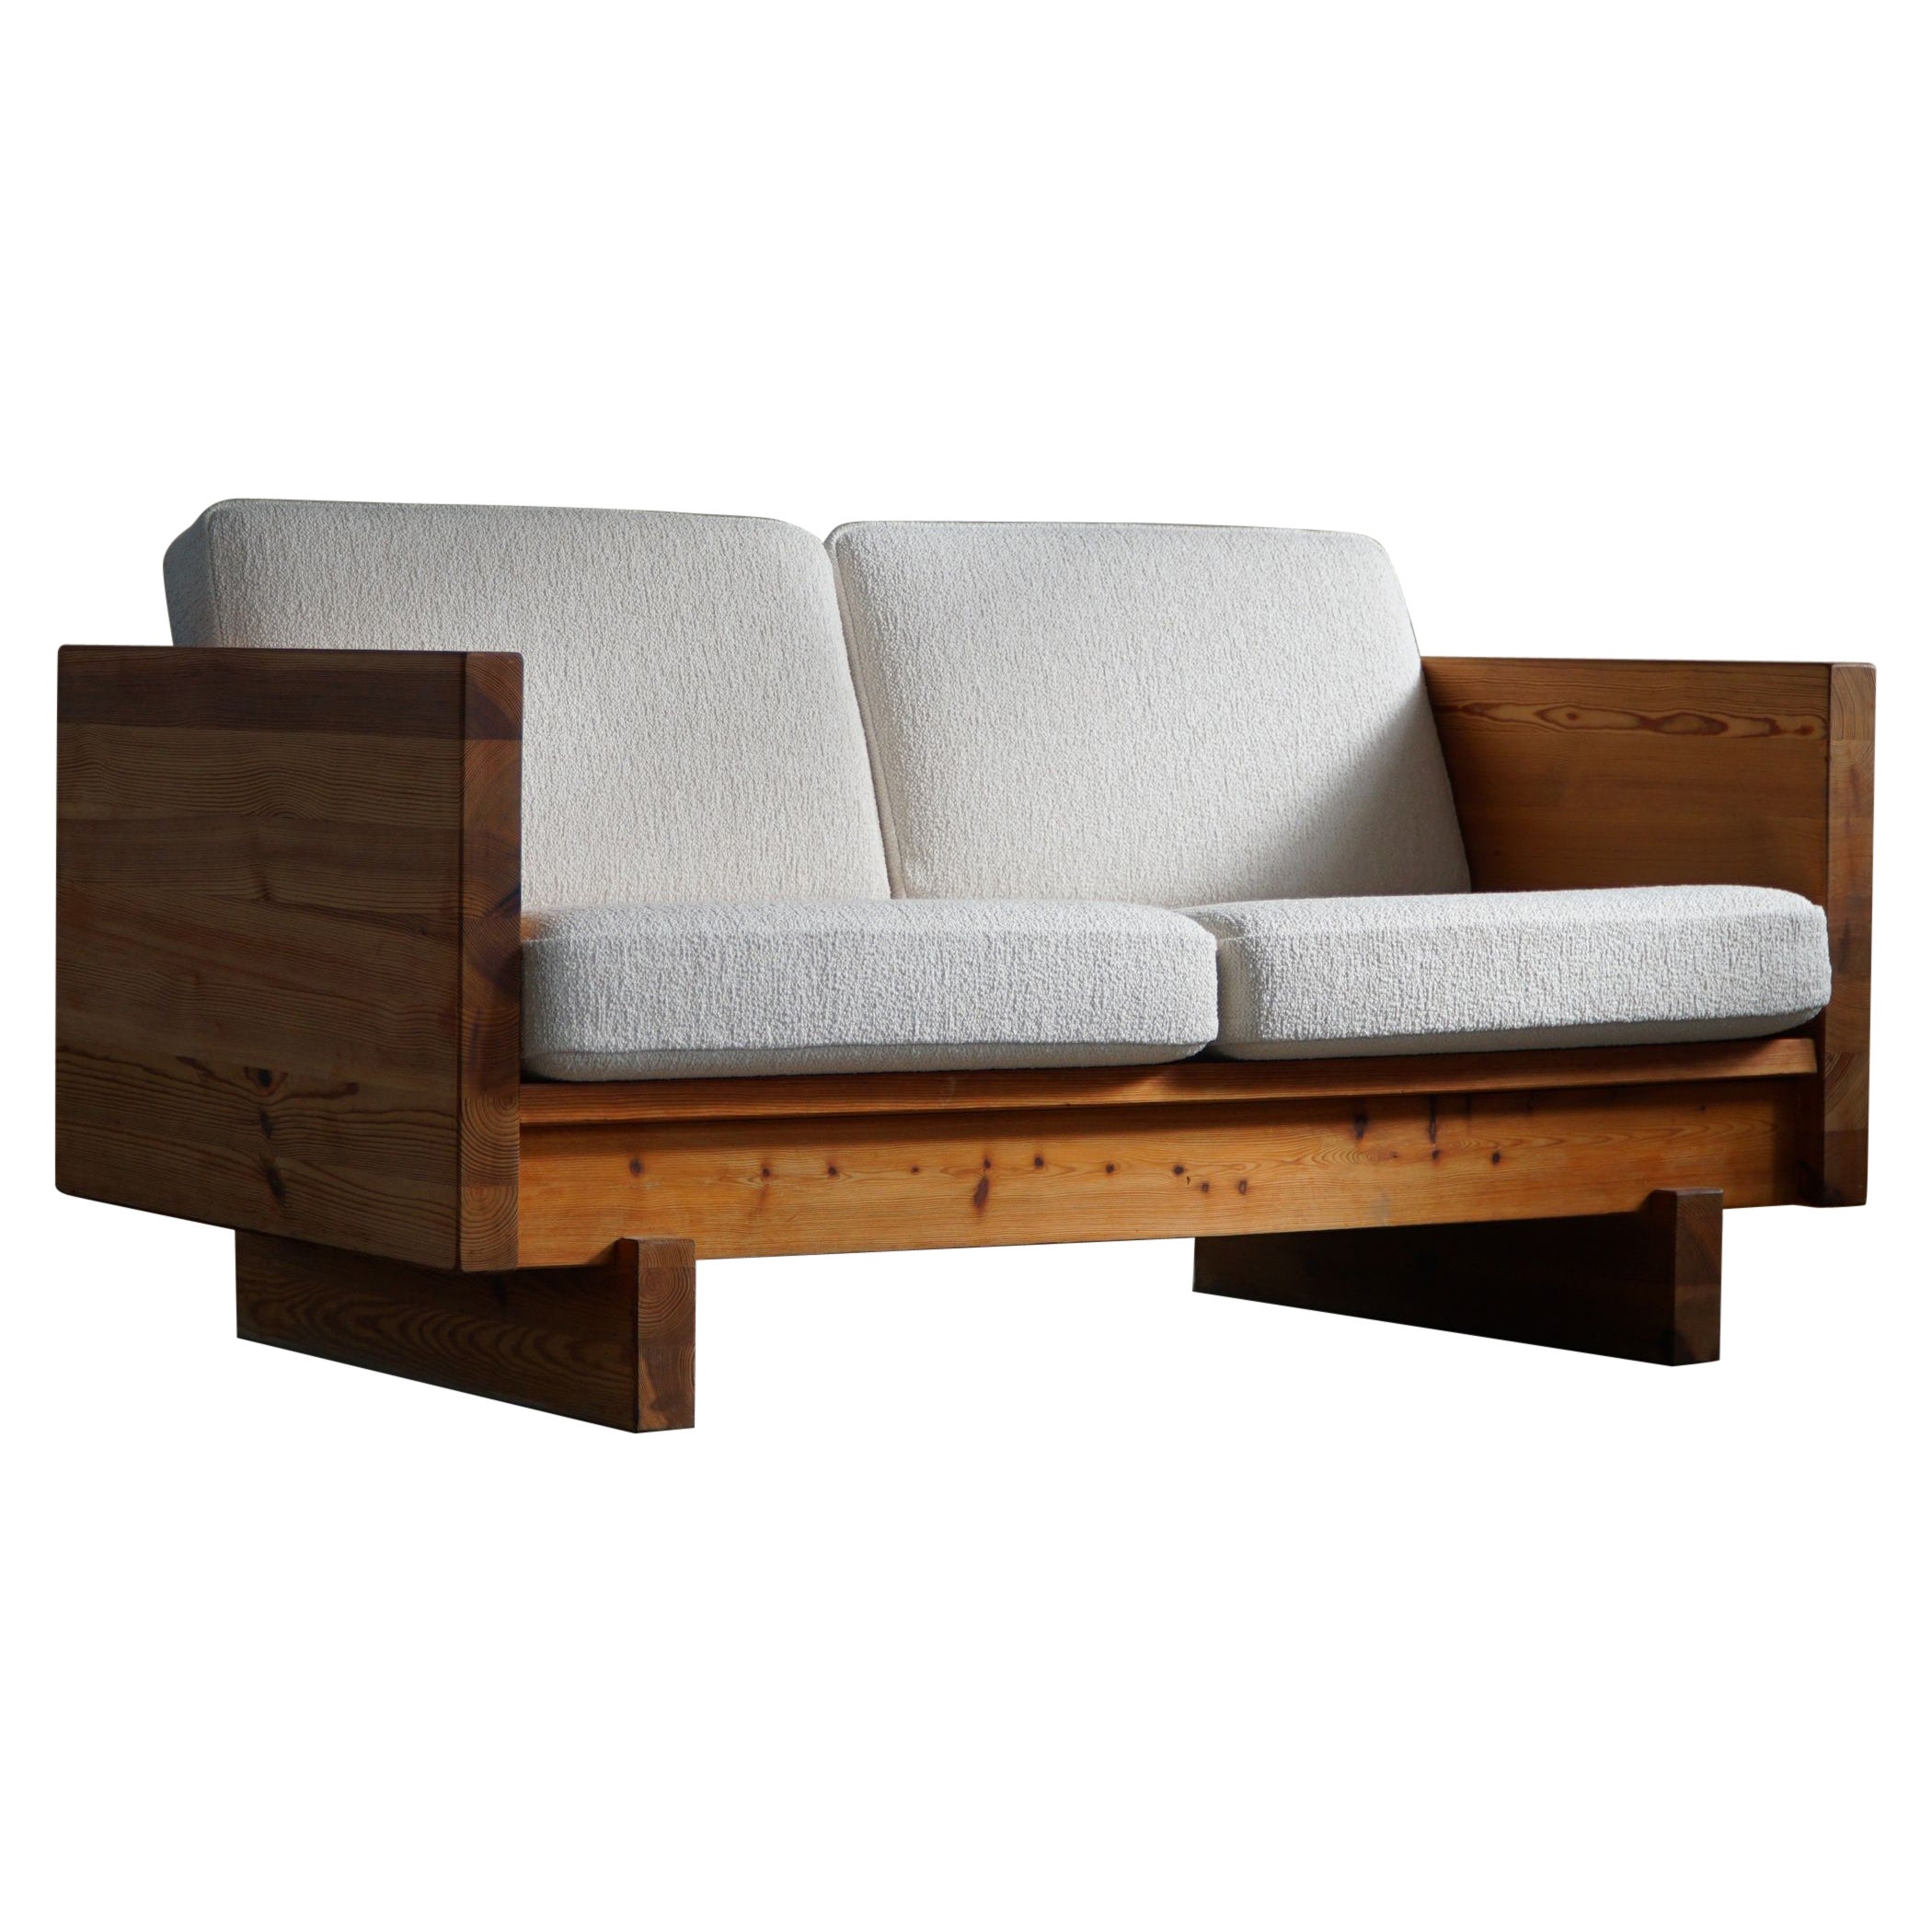 Swedish Modern, Two Seater Sofa in Solid Pine, Reupholstered in Bouclé, 1960s